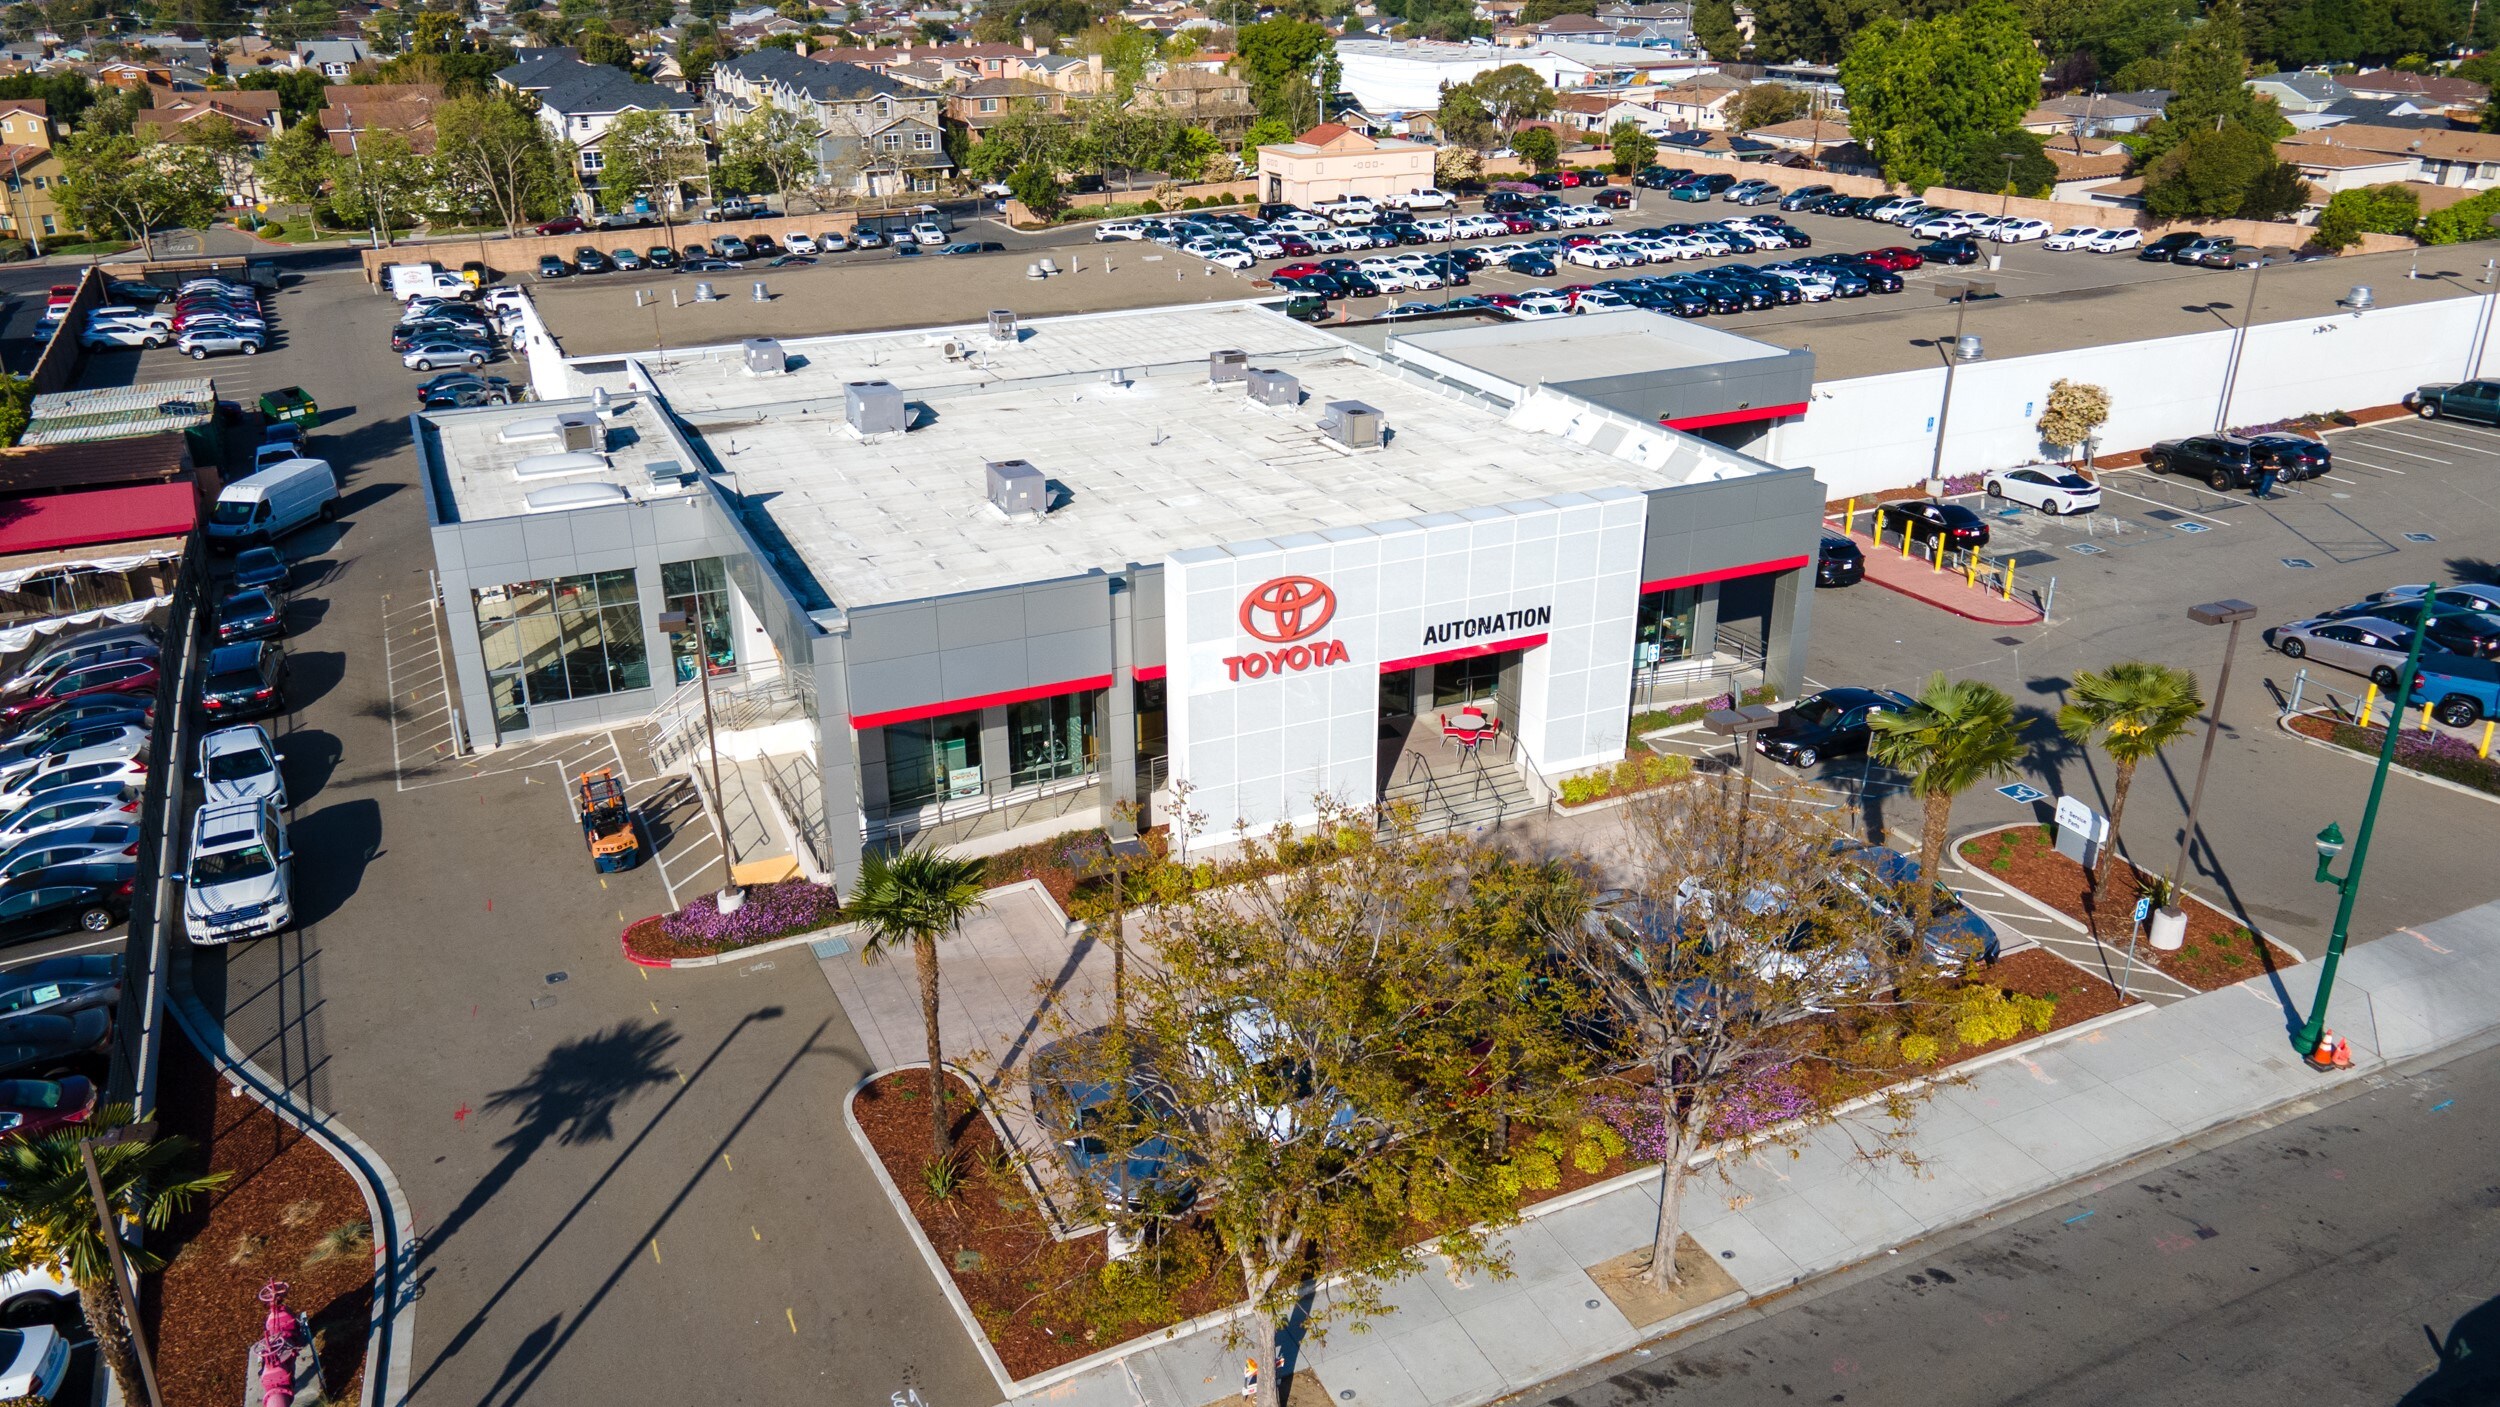 Overhead exterior view of AutoNation Toyota Hayward. The building is grey and white and has some large windows. Many vehicles can be seen parked near the building along with trees and homes in the background.